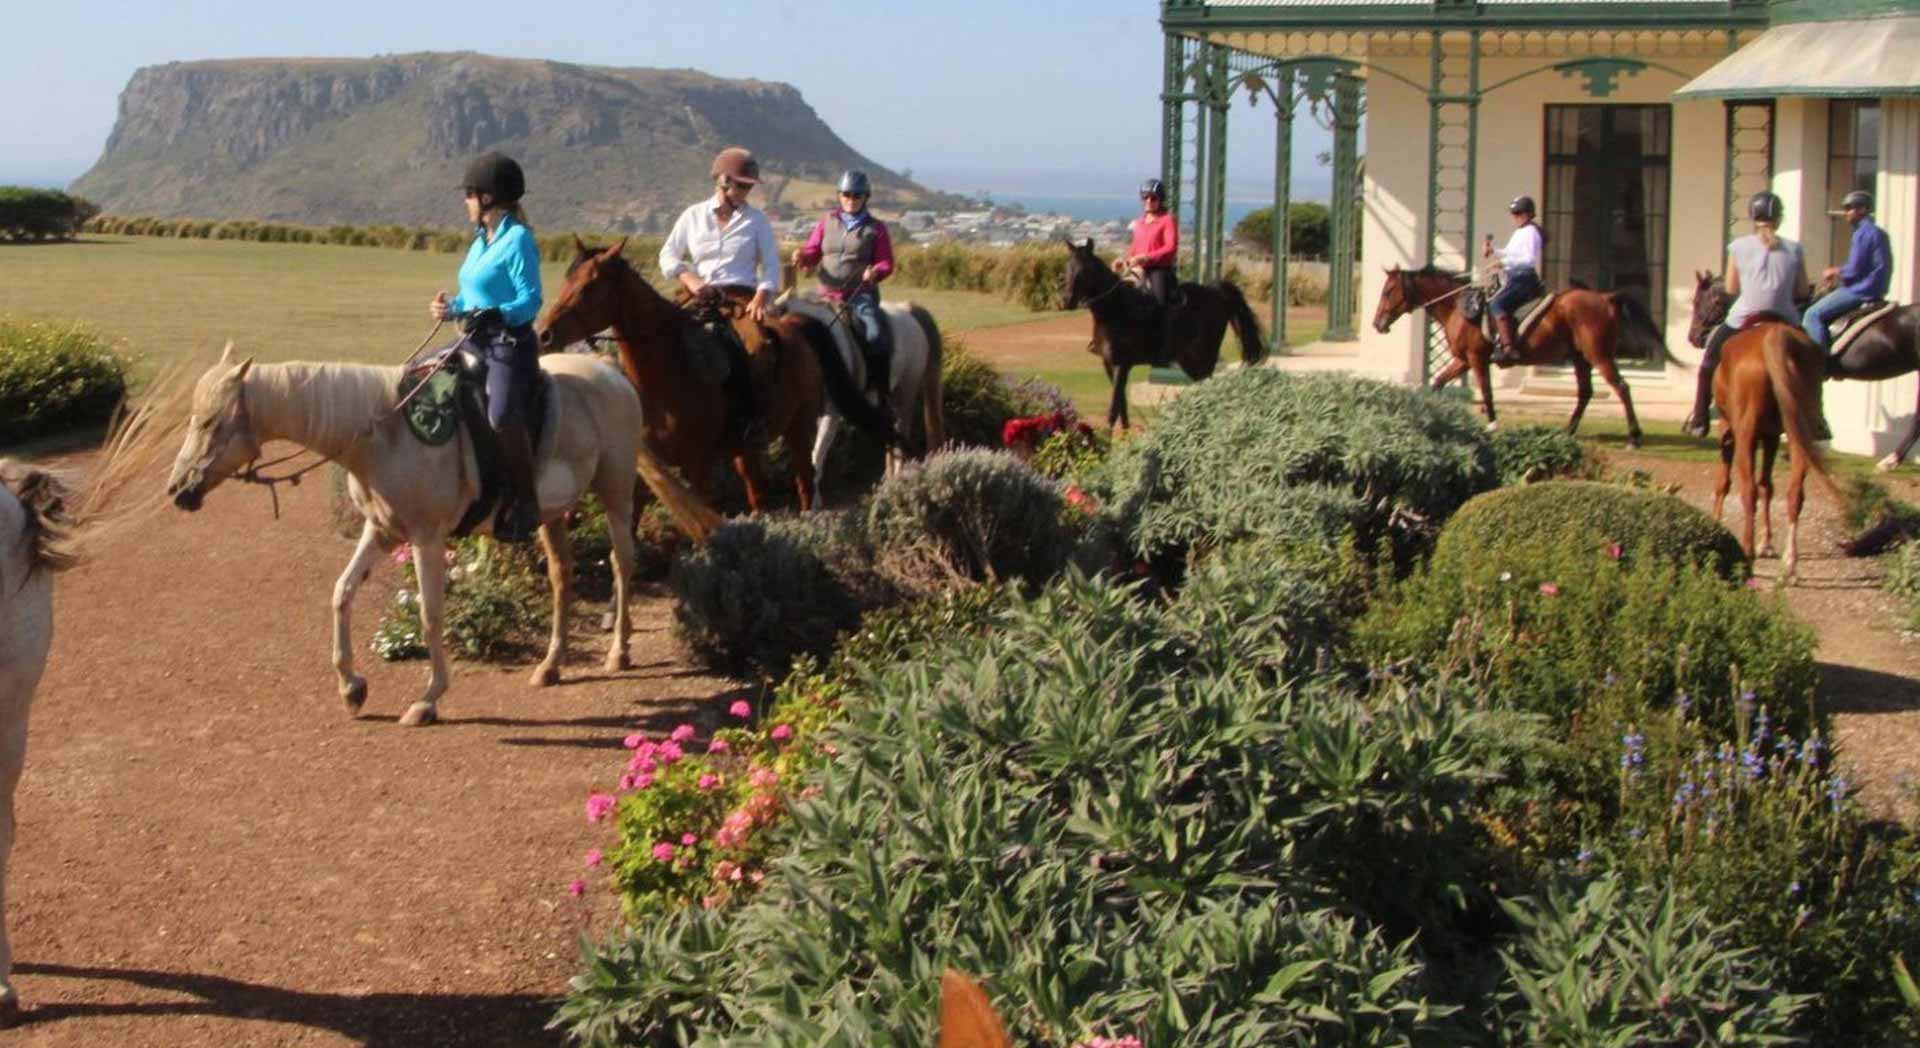 Channel Your Inner Child With a Horse Riding Adventure